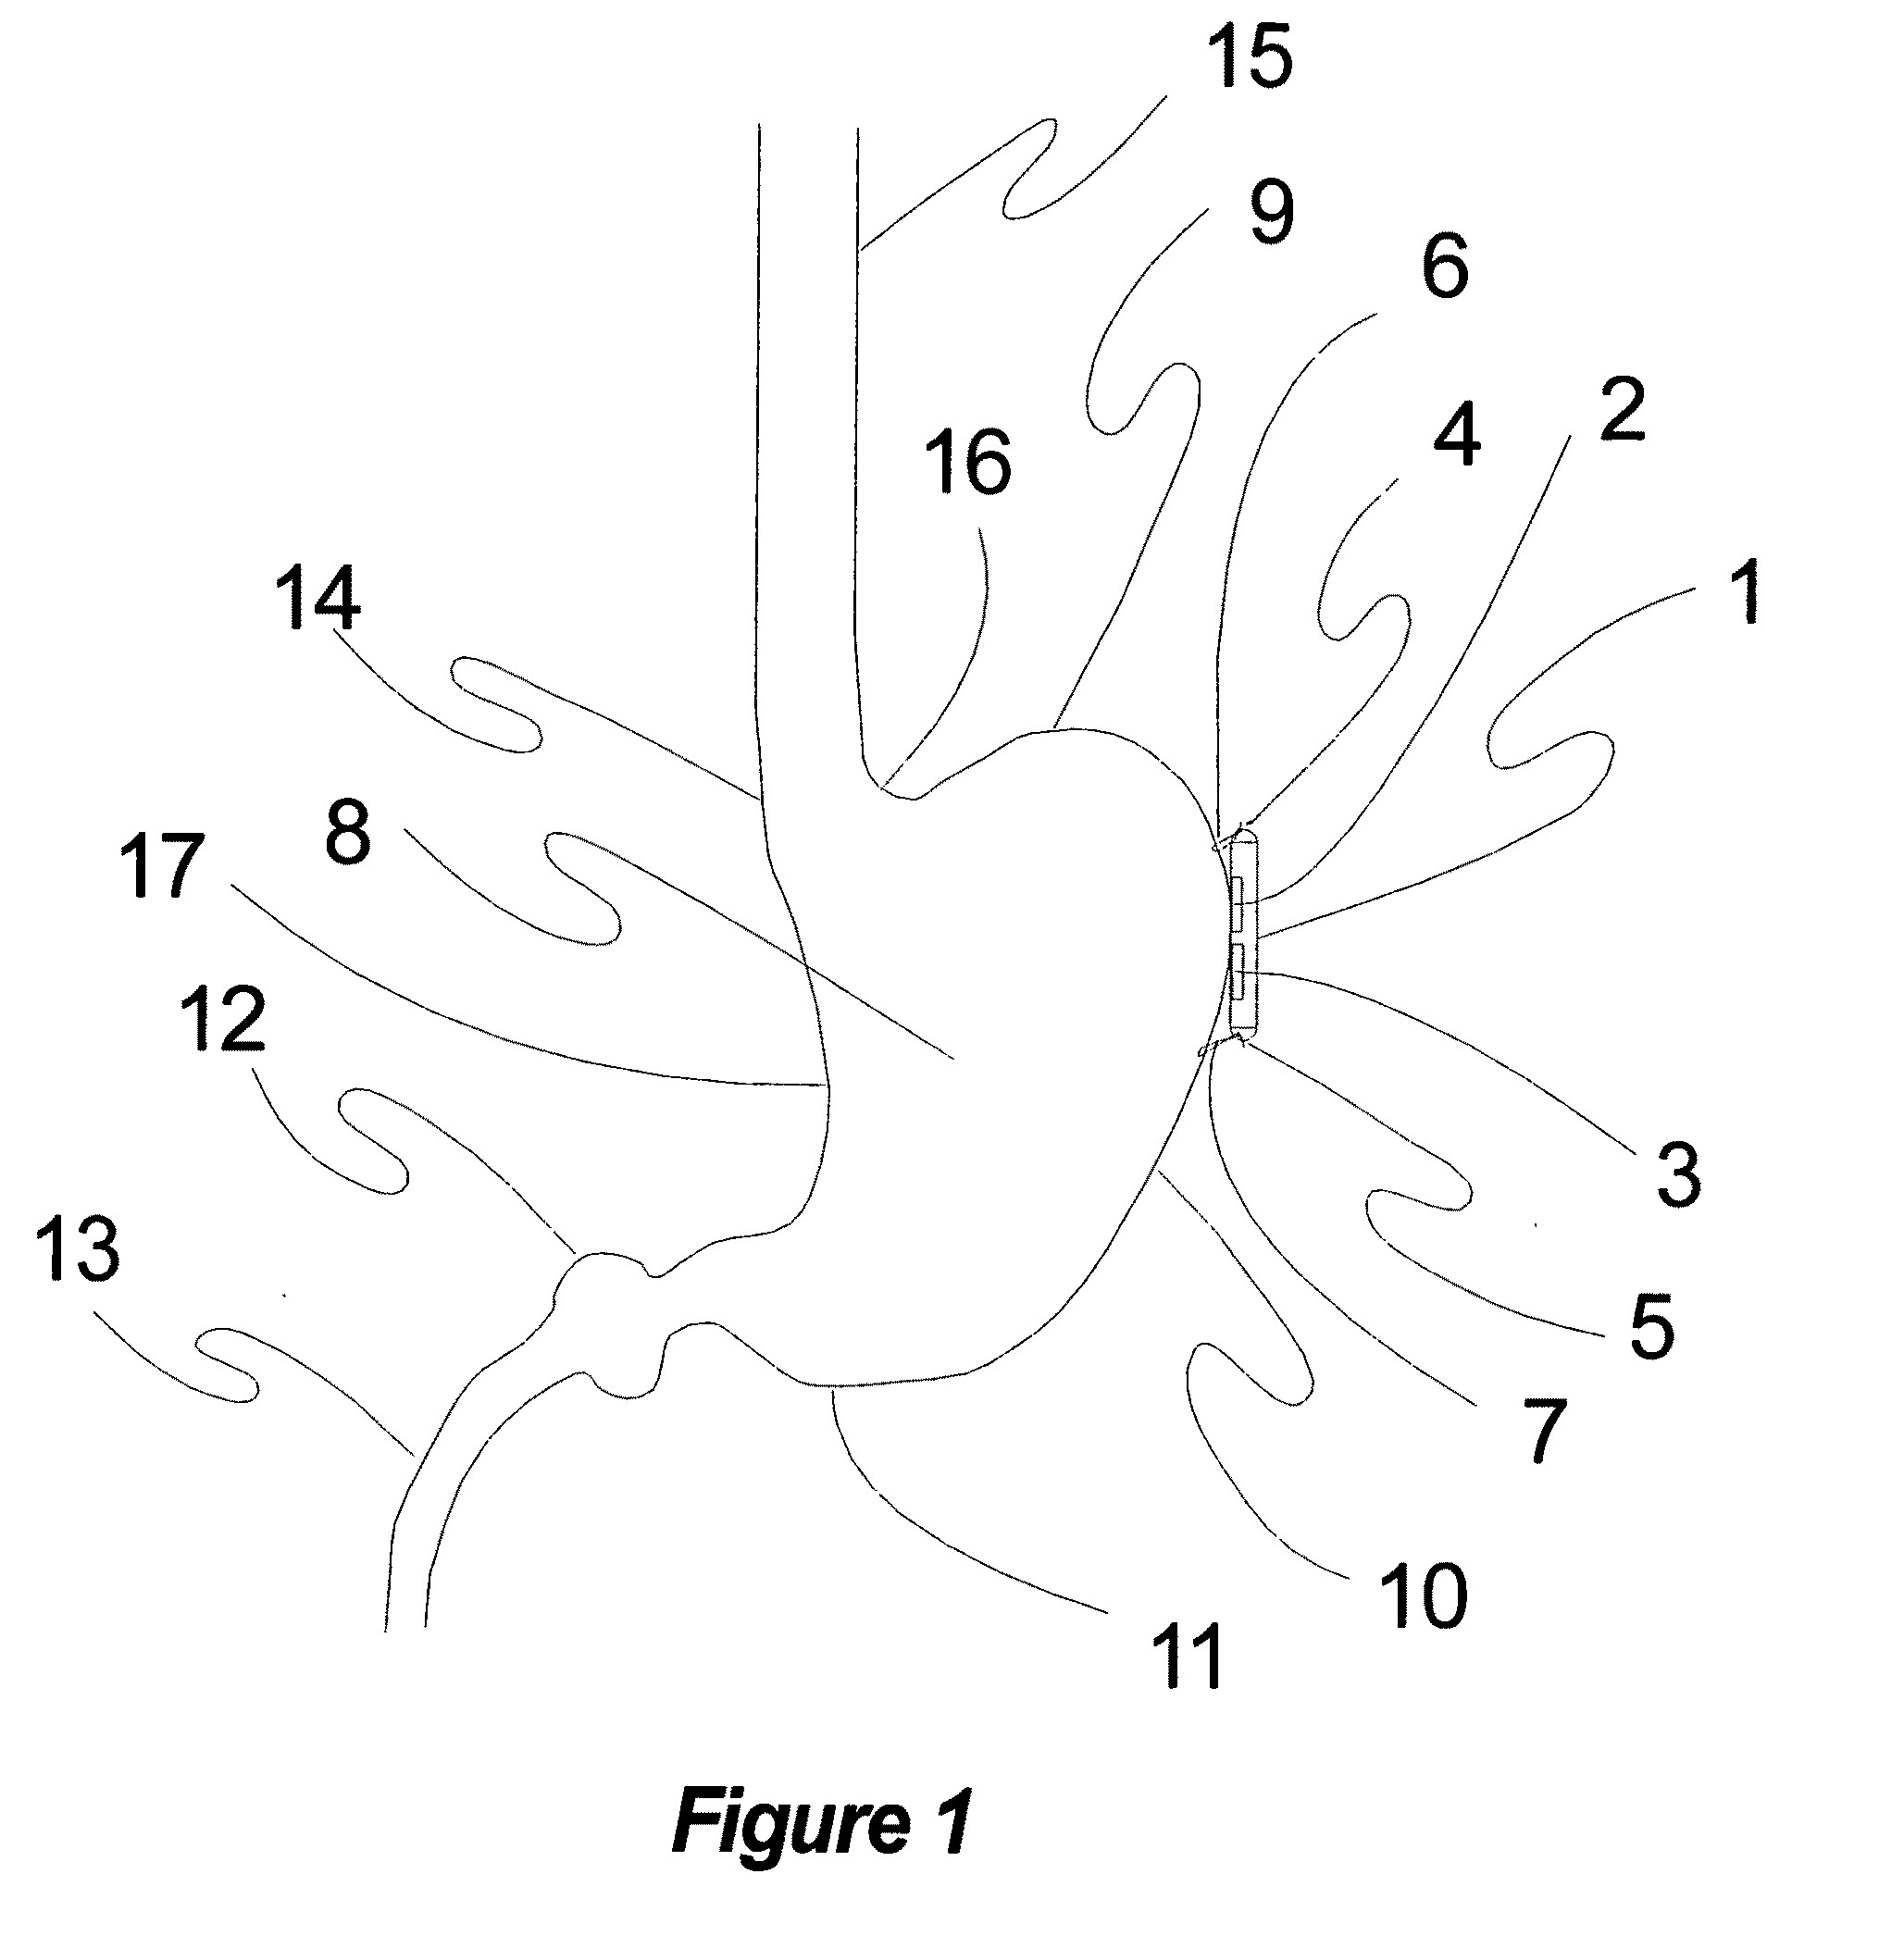 Method and apparatus for conformal electrodes for autonomic neuromodulation for the treatment of obesity and other conditions